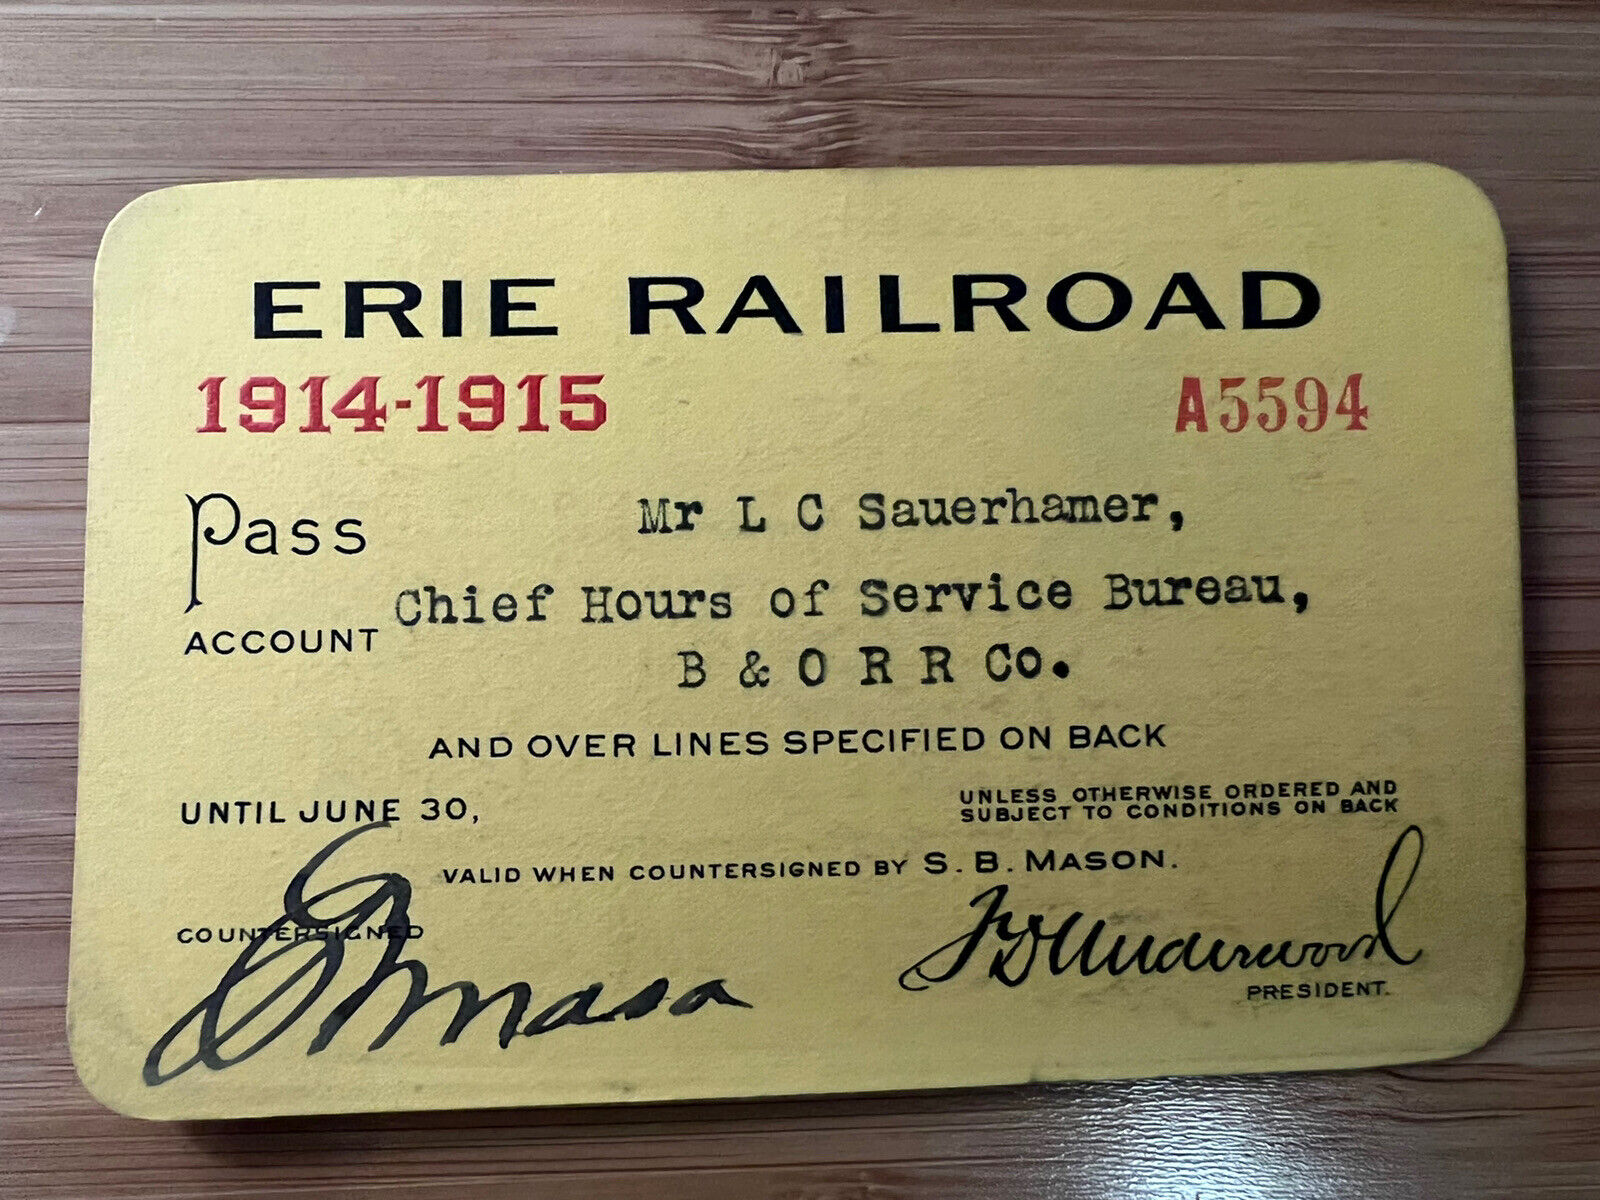 1914-1915 ERIE RAILROAD PASS ISSUED TO CHIEF HOURS OF SERVICE BUREAU B&O RR